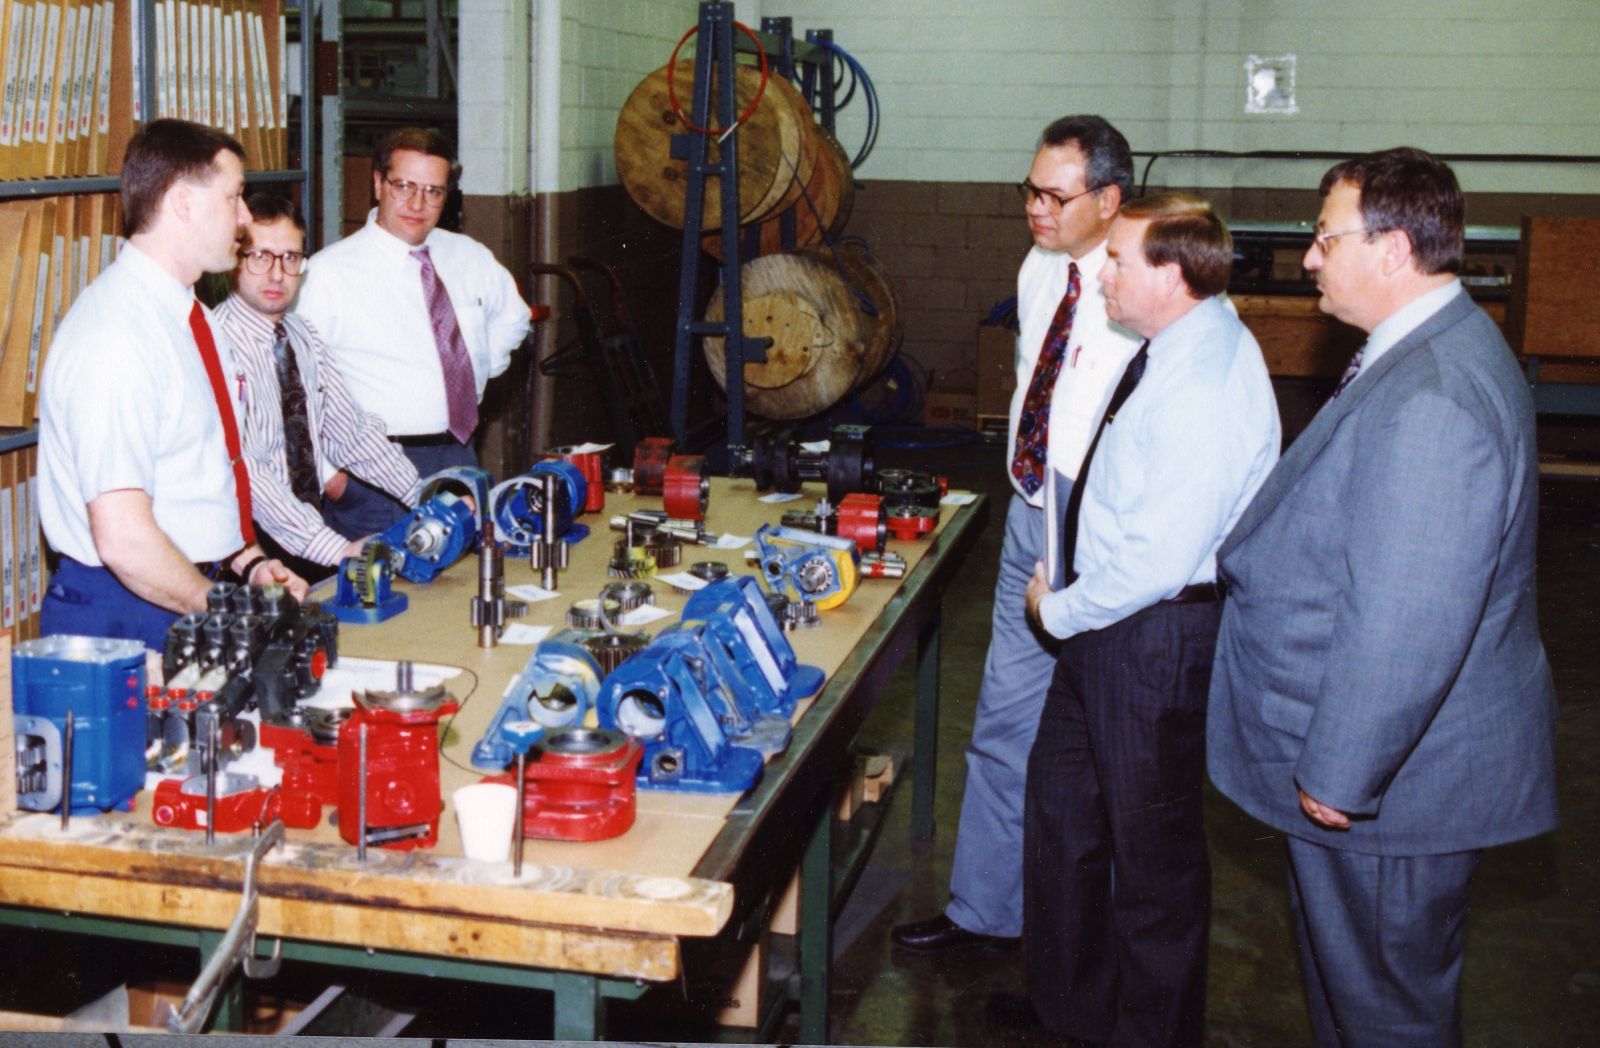 An archival photo of members of the sales team learning about our products in 1994.